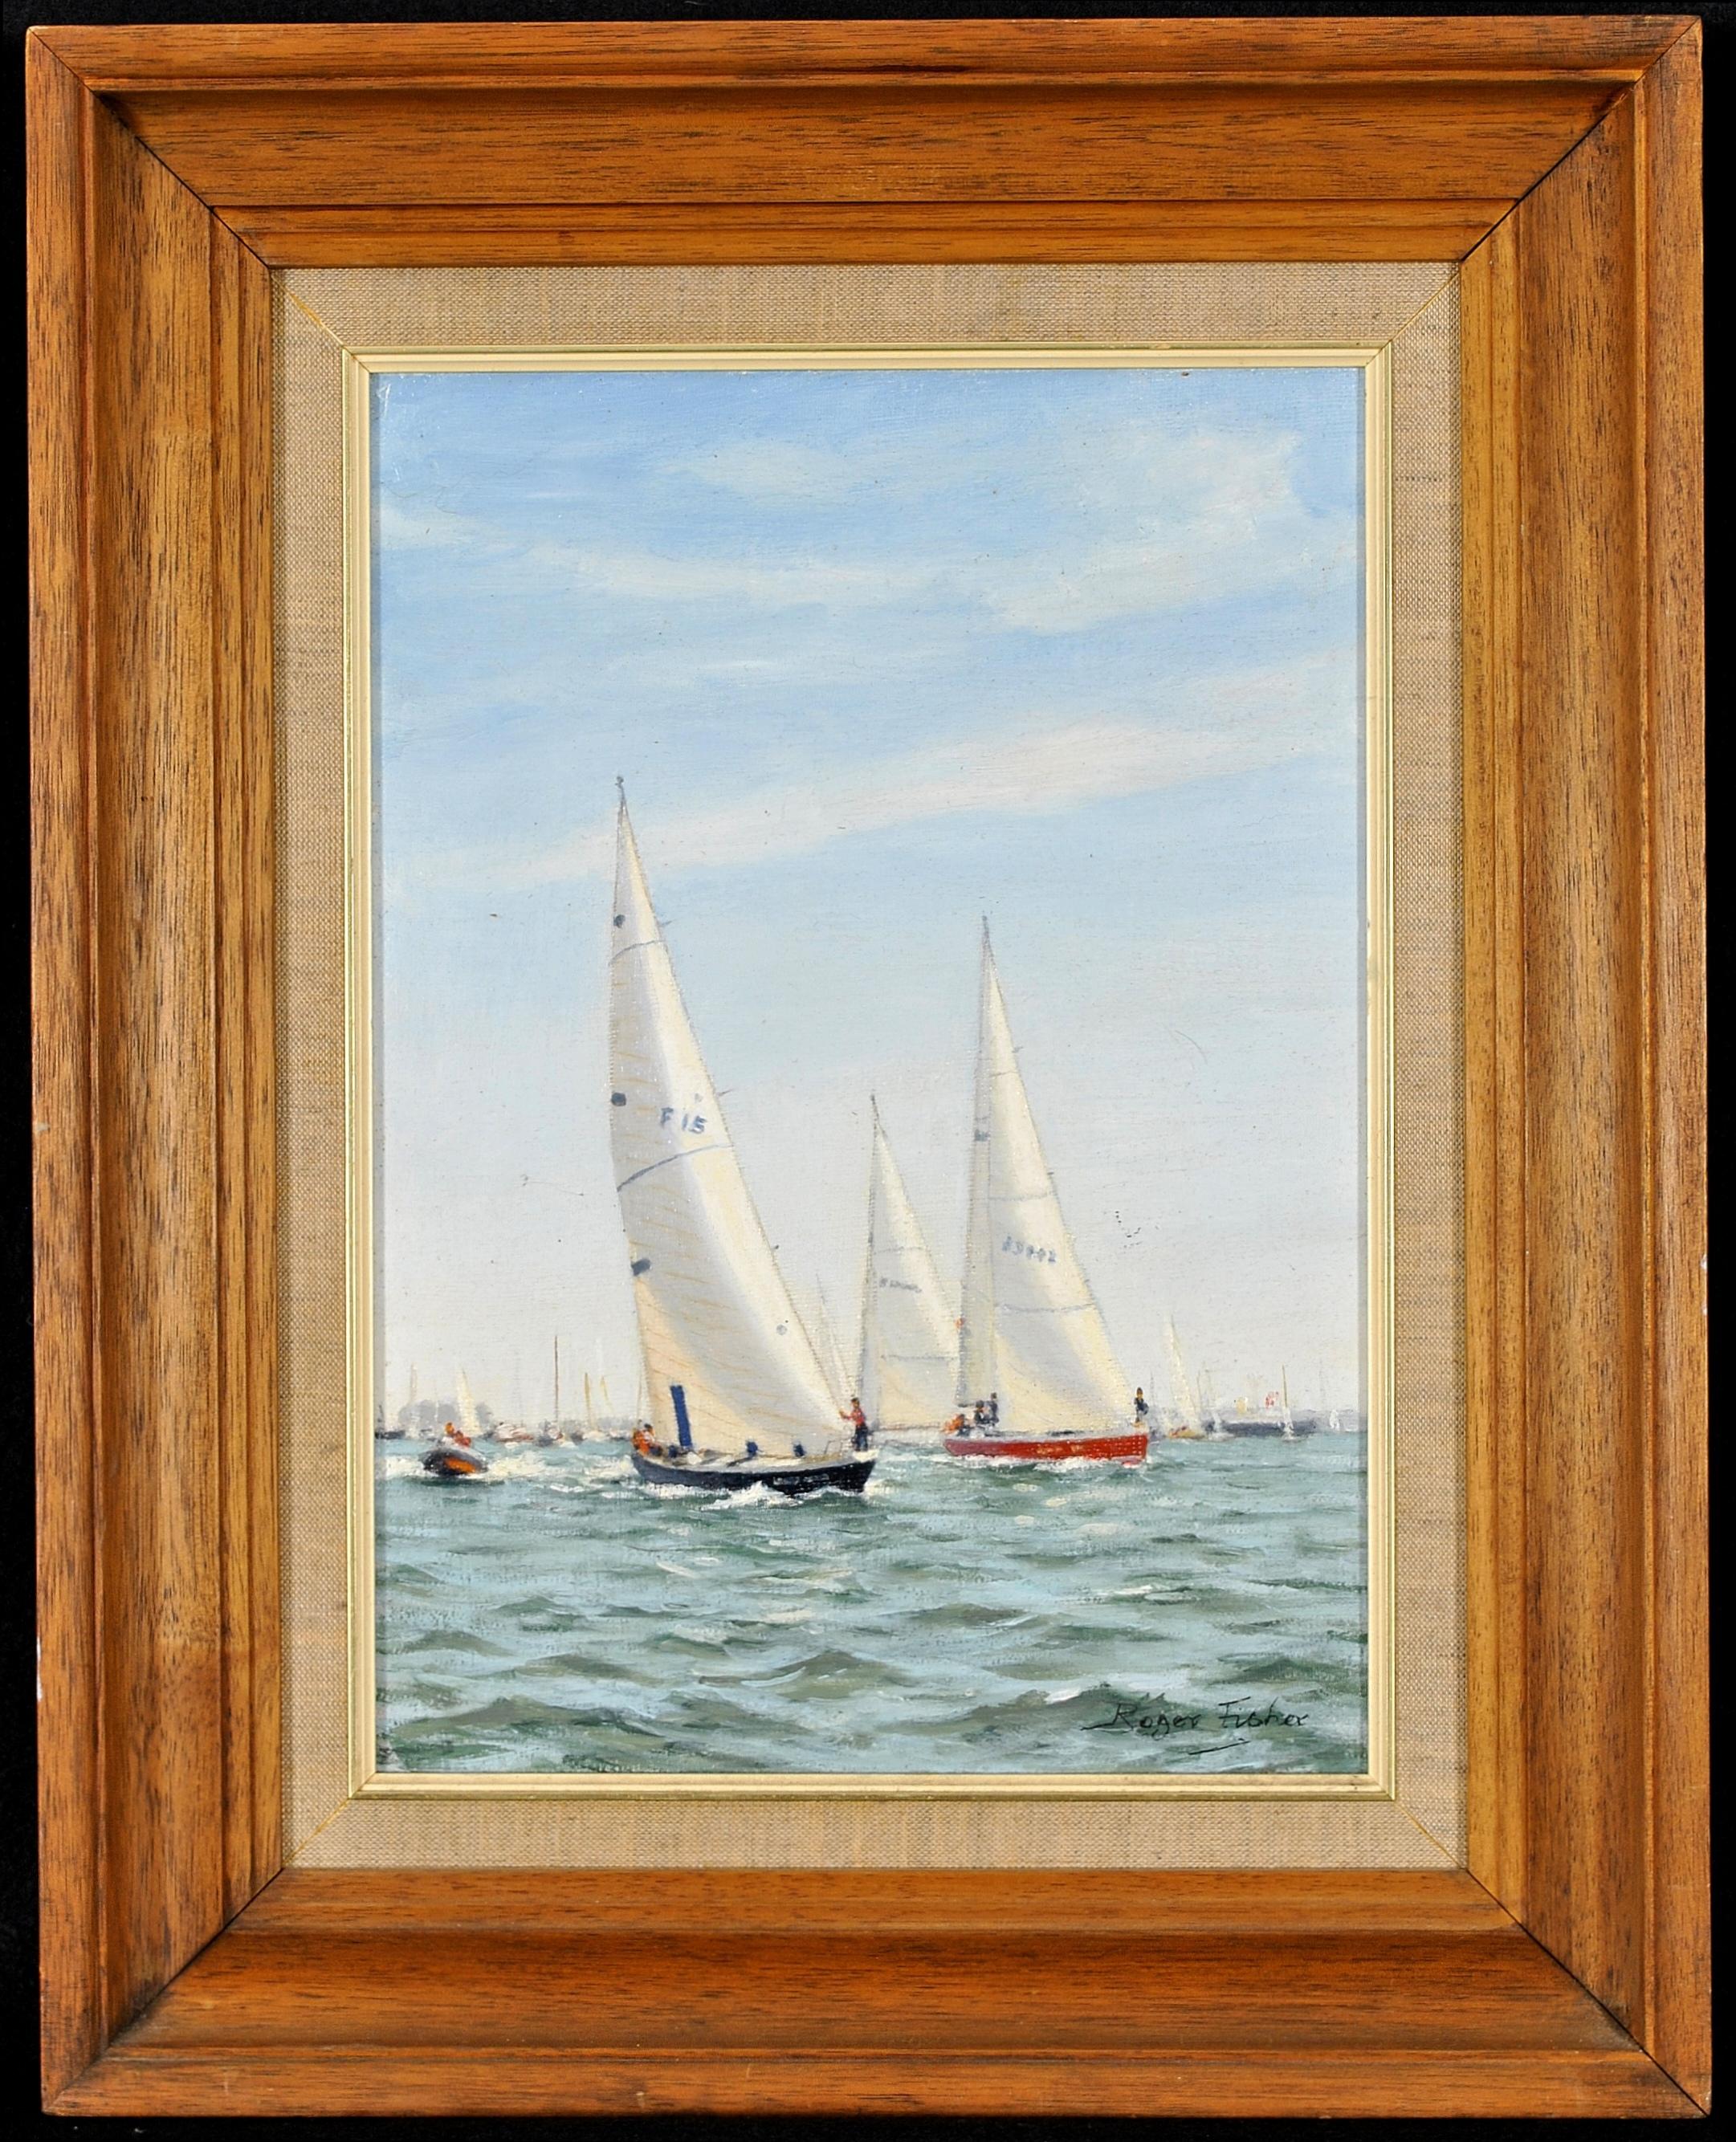 Roger Roland Sutton Fisher Landscape Painting - Round the World Race - English Marine Maritime Seascape Yachts Oil Painting